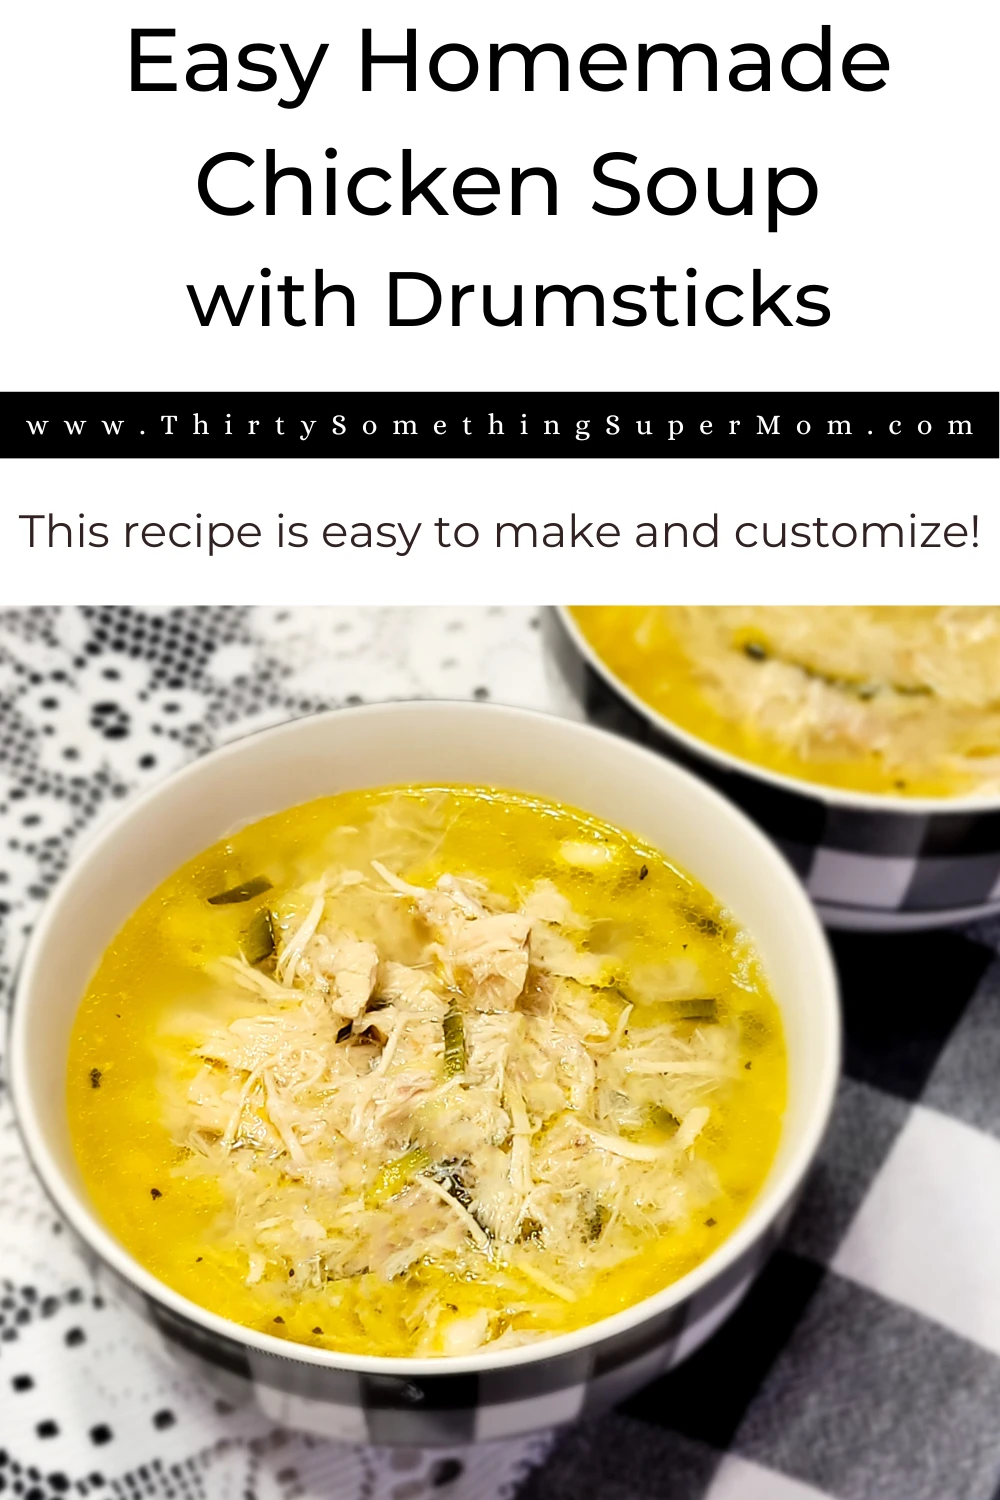 https://thirtysomethingsupermom.com/wp-content/uploads/2015/03/chicken-soup-with-drumsticks-recipe-.png.webp